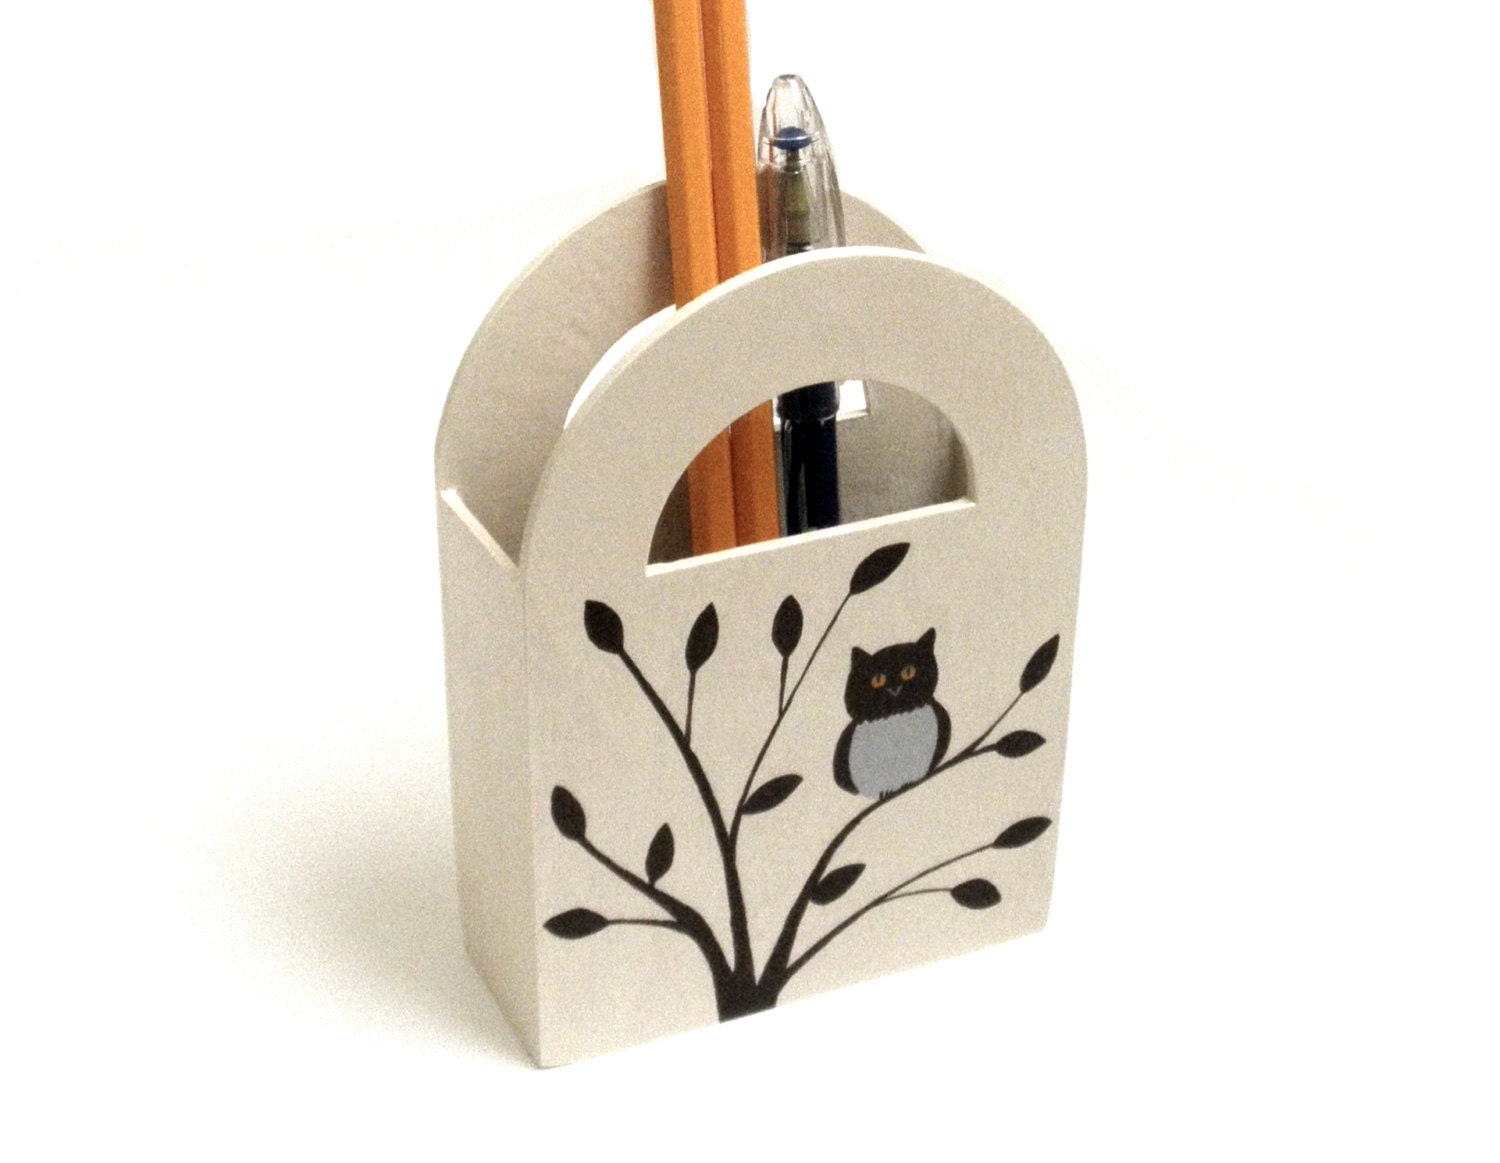 Little owl pencil cup - Pen holder - Desk accessory - Hand-painted gift for teachers - SunnyLeaf